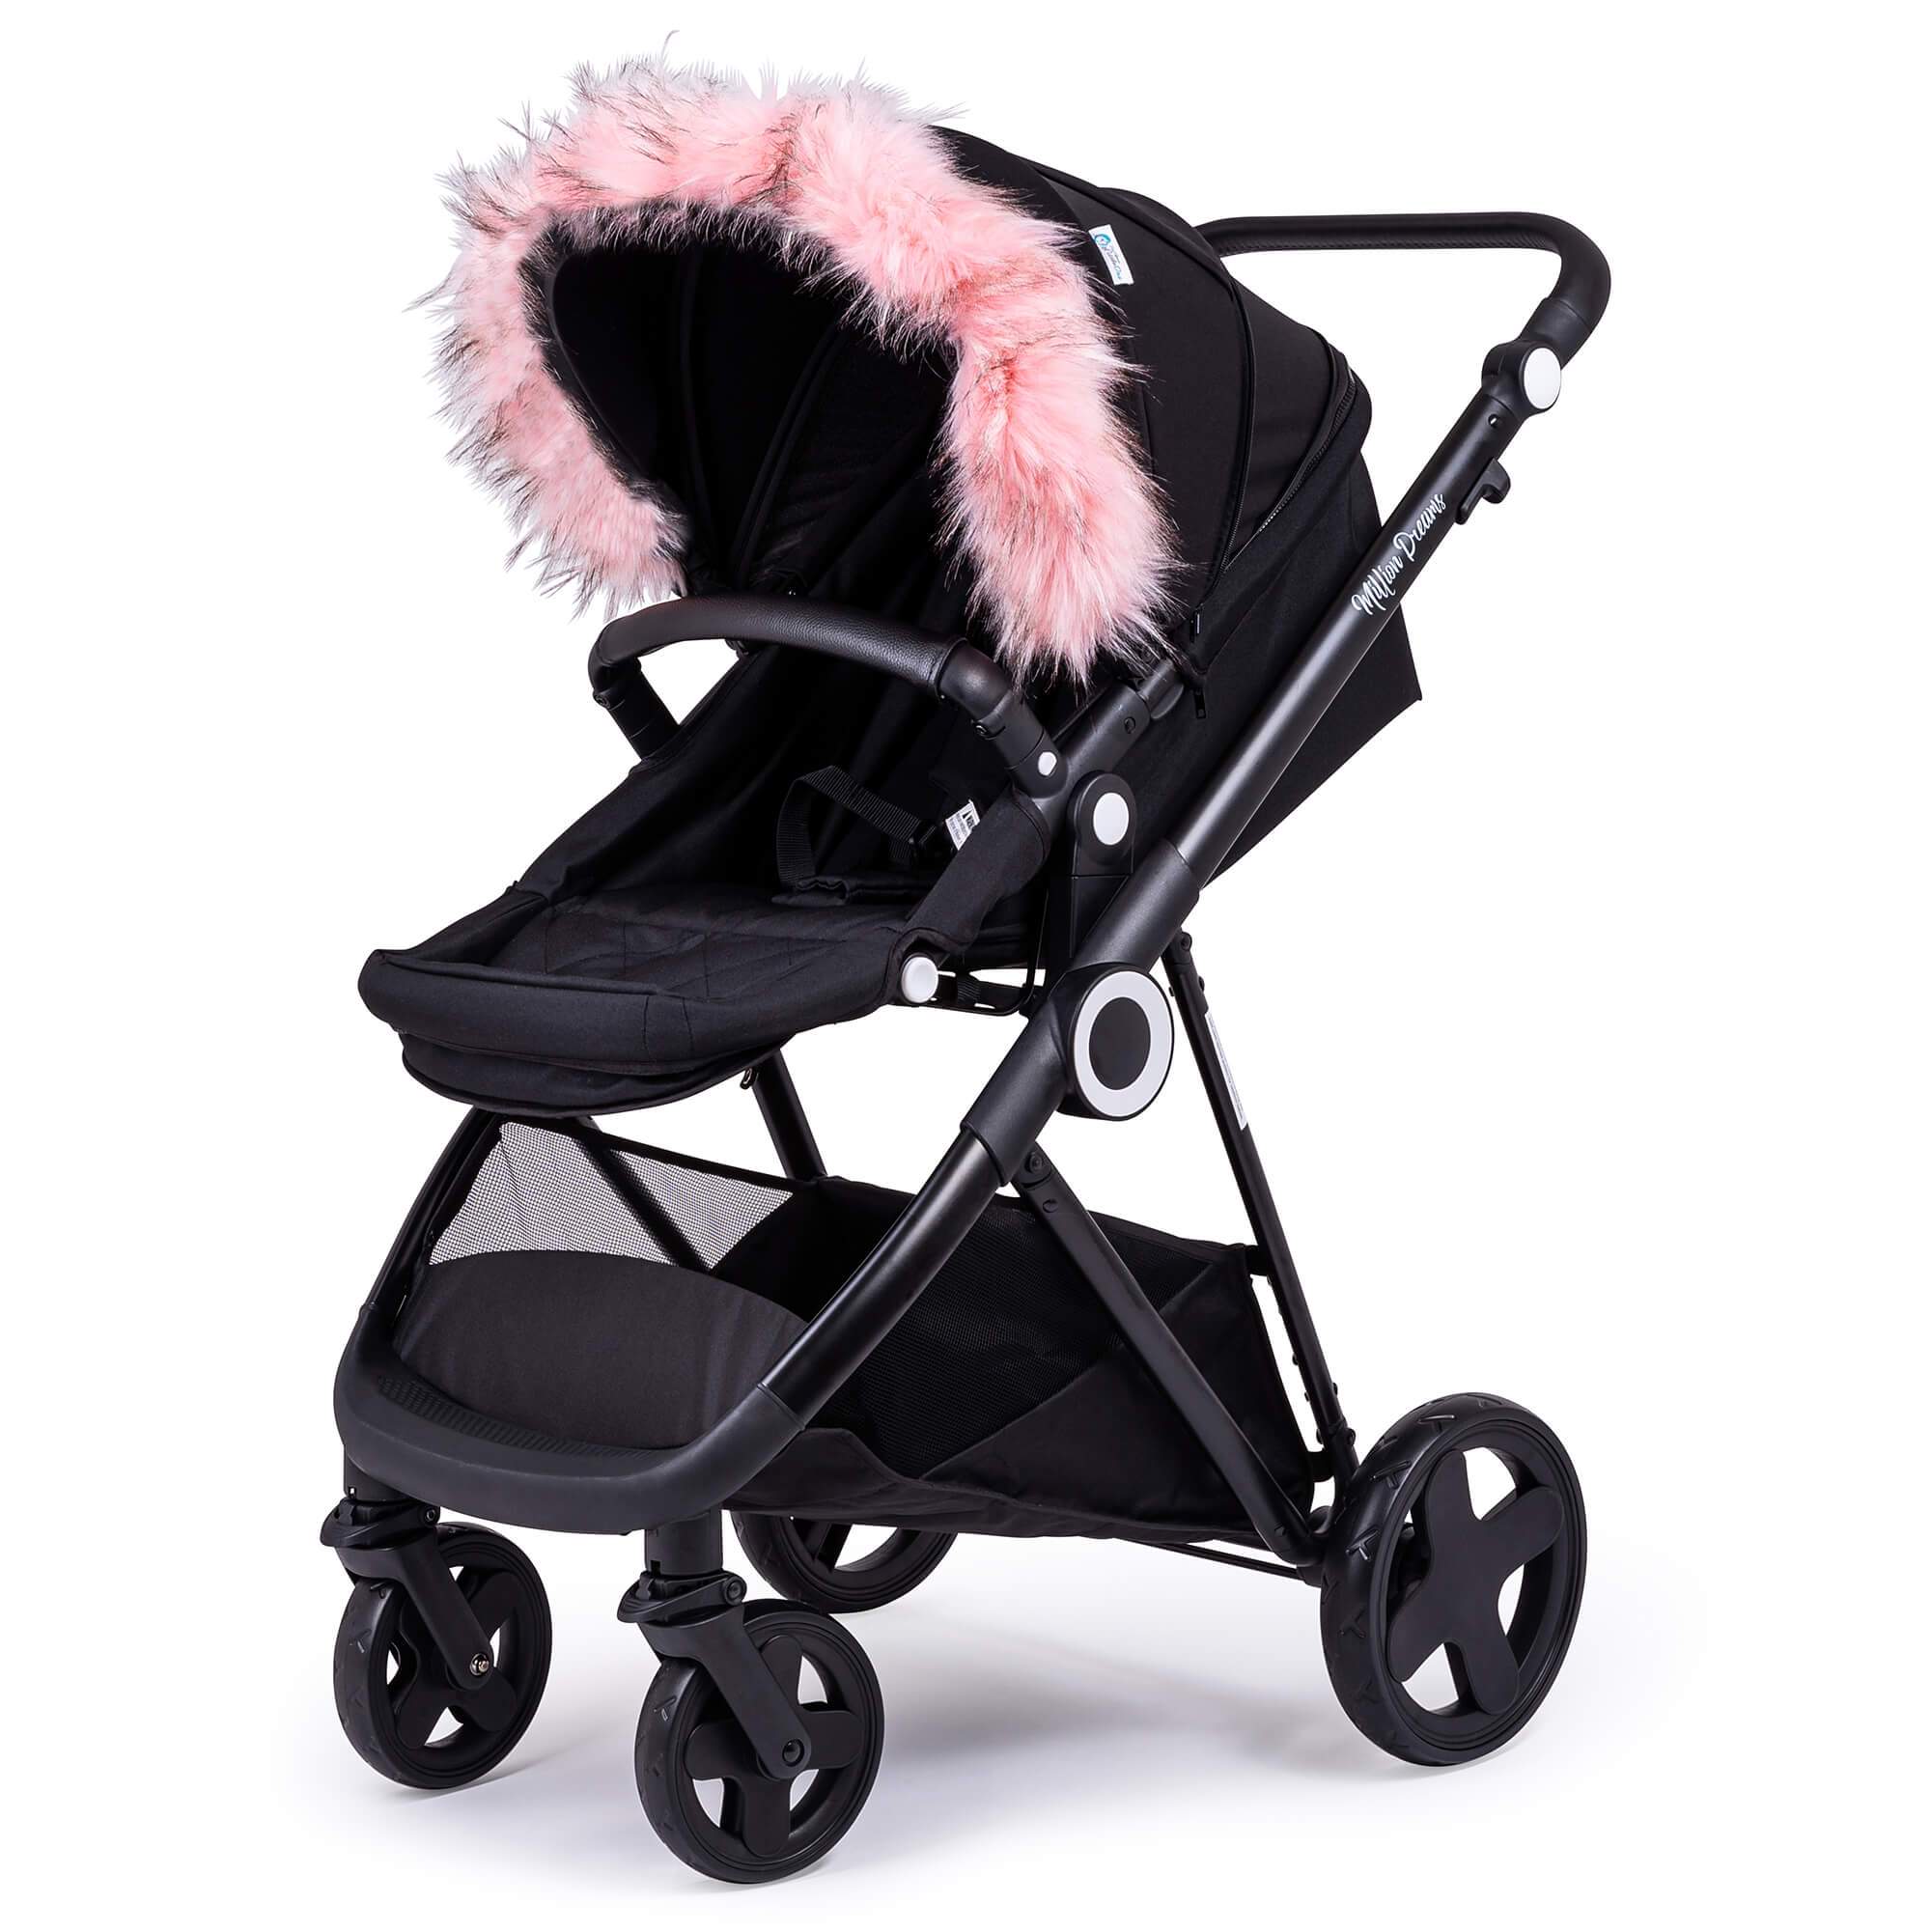 Pram Fur Hood Trim Attachment for Pushchair Compatible with Uppababy - Light Pink / Fits All Models | For Your Little One